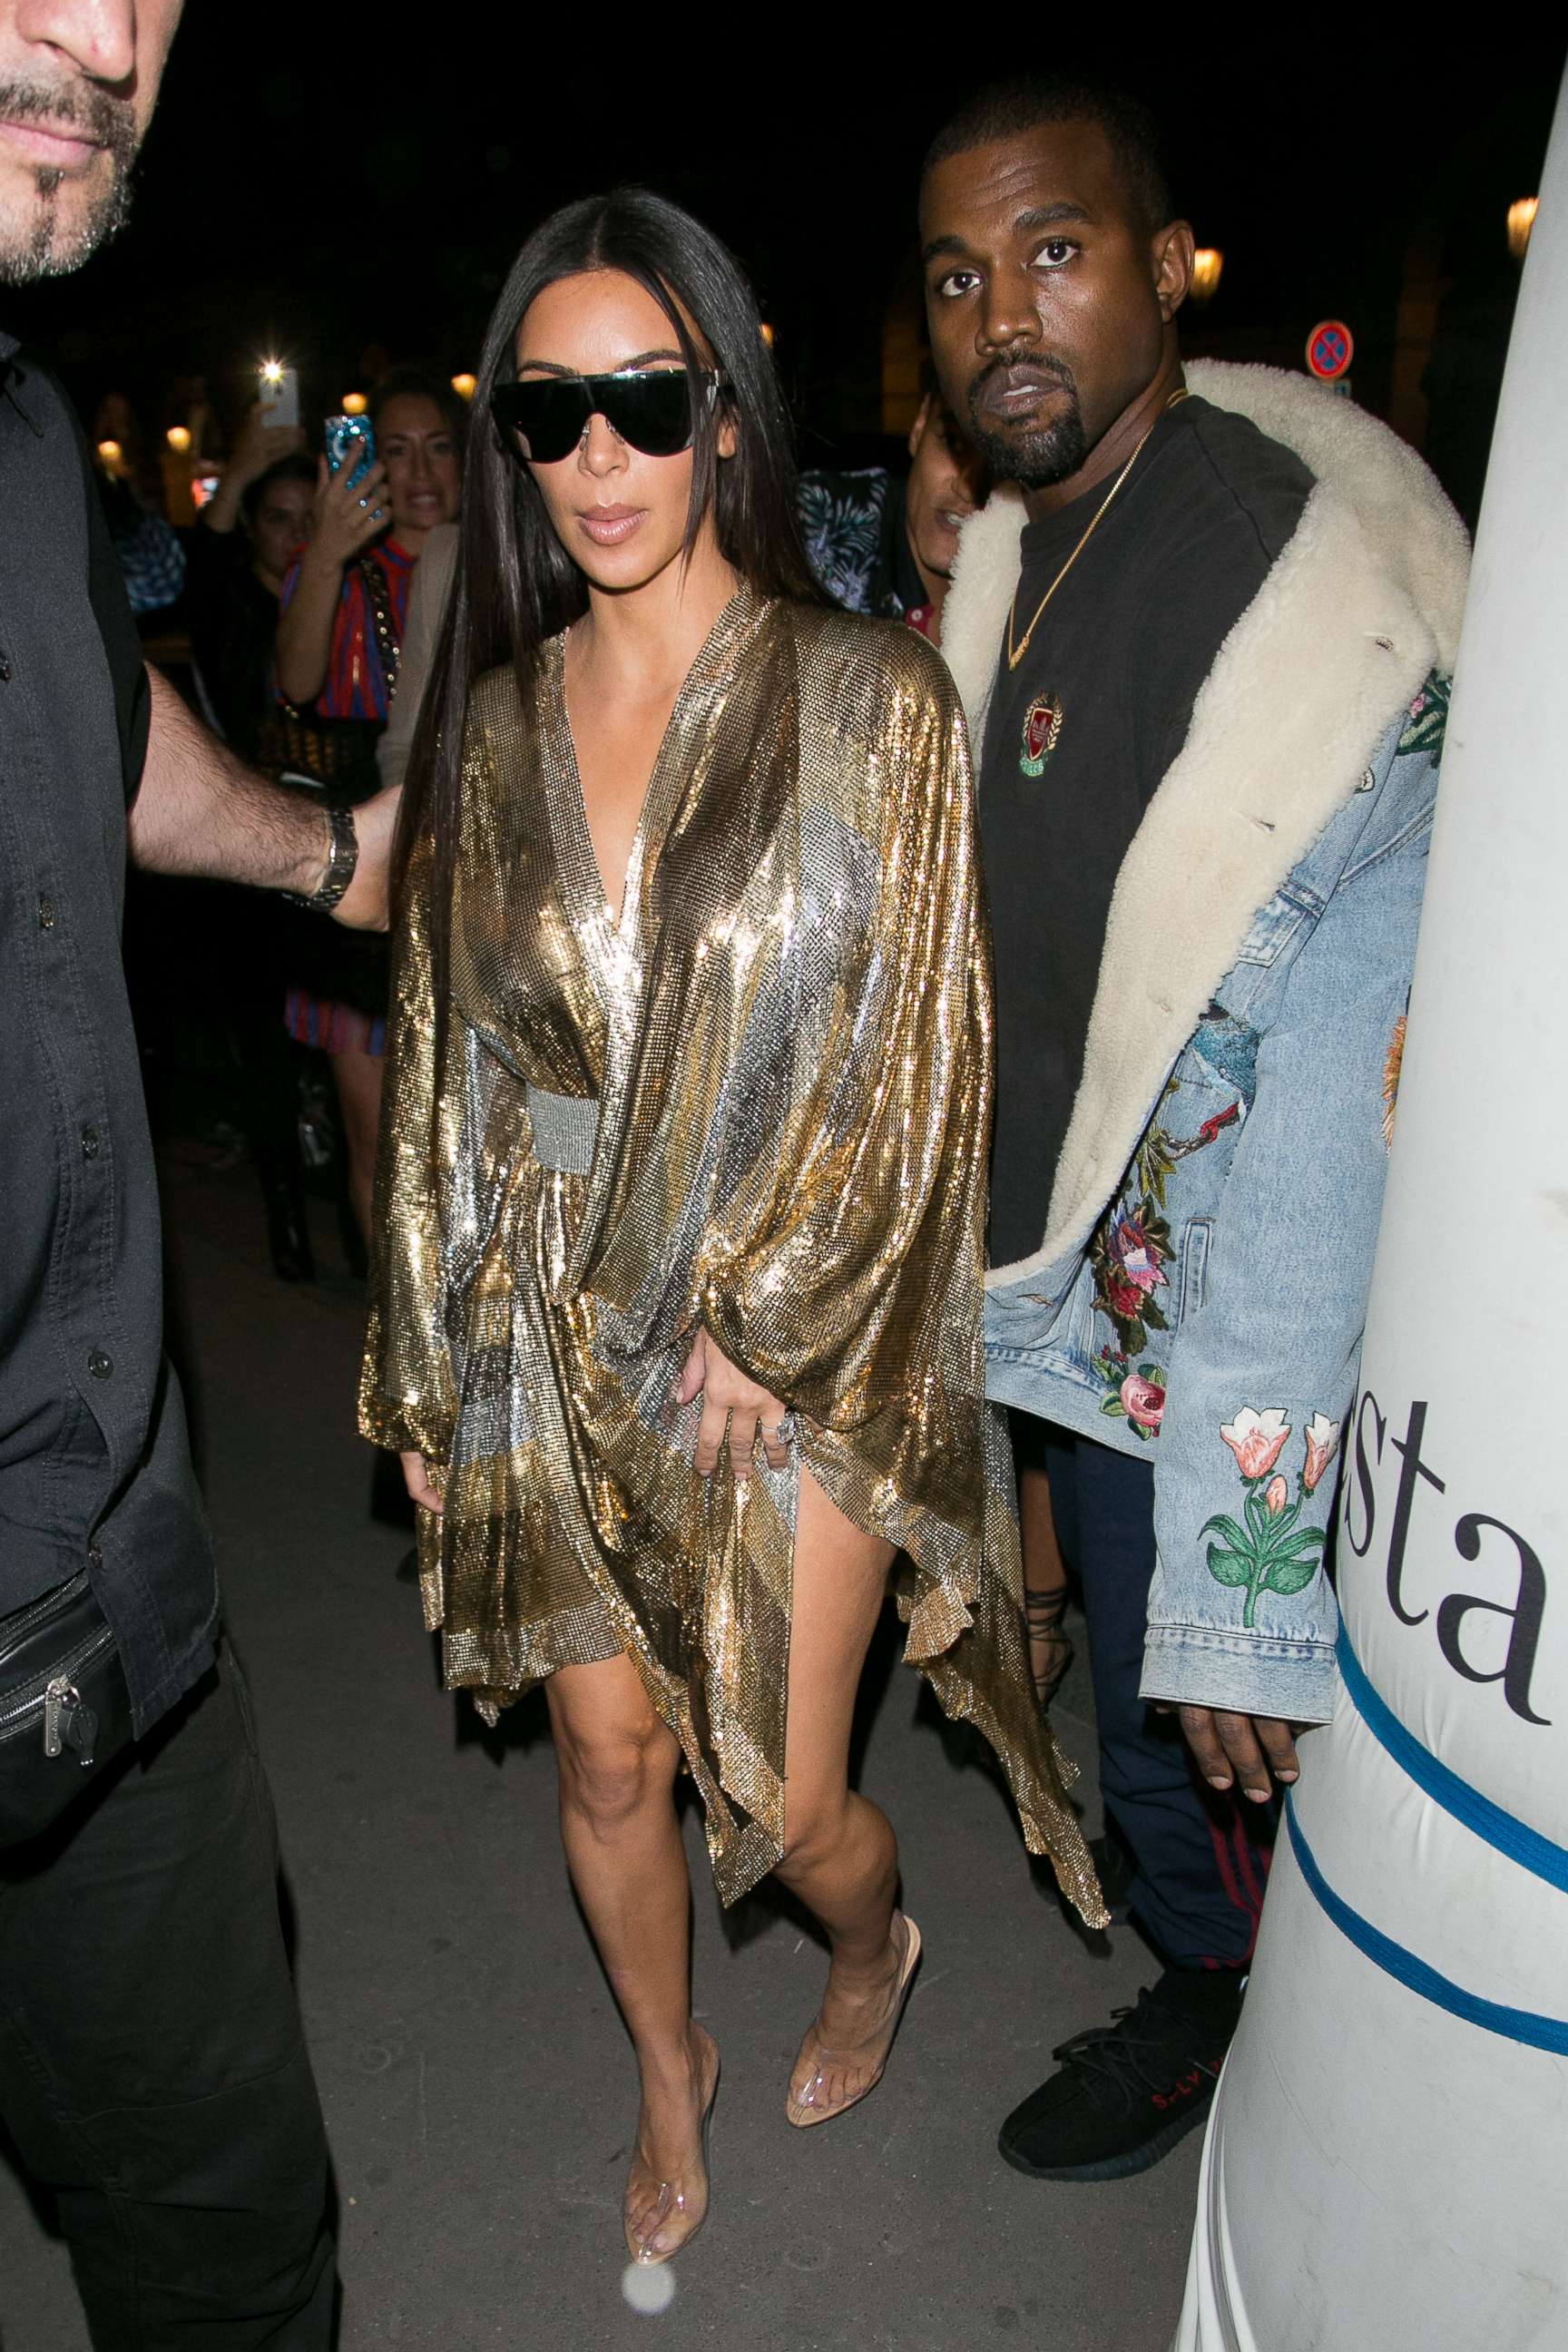 PHOTO: Kim Kardasian West and Kanye West arrive at the BALMAIN after party, Sept. 29, 2016 in Paris.